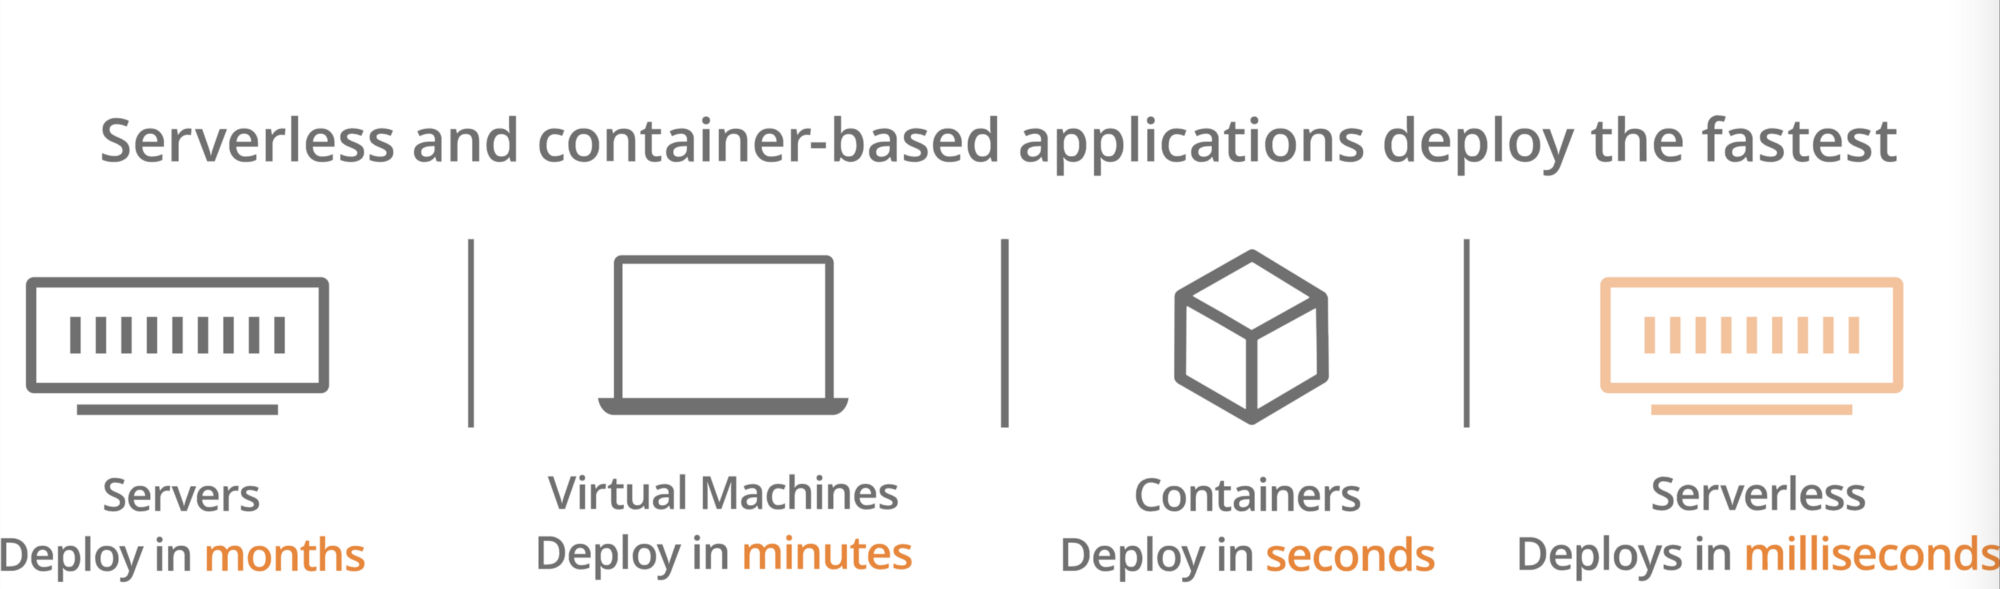 Checkout Cloudflare’s post on serverless vs containers. There are some really cool insights about this particular subject.